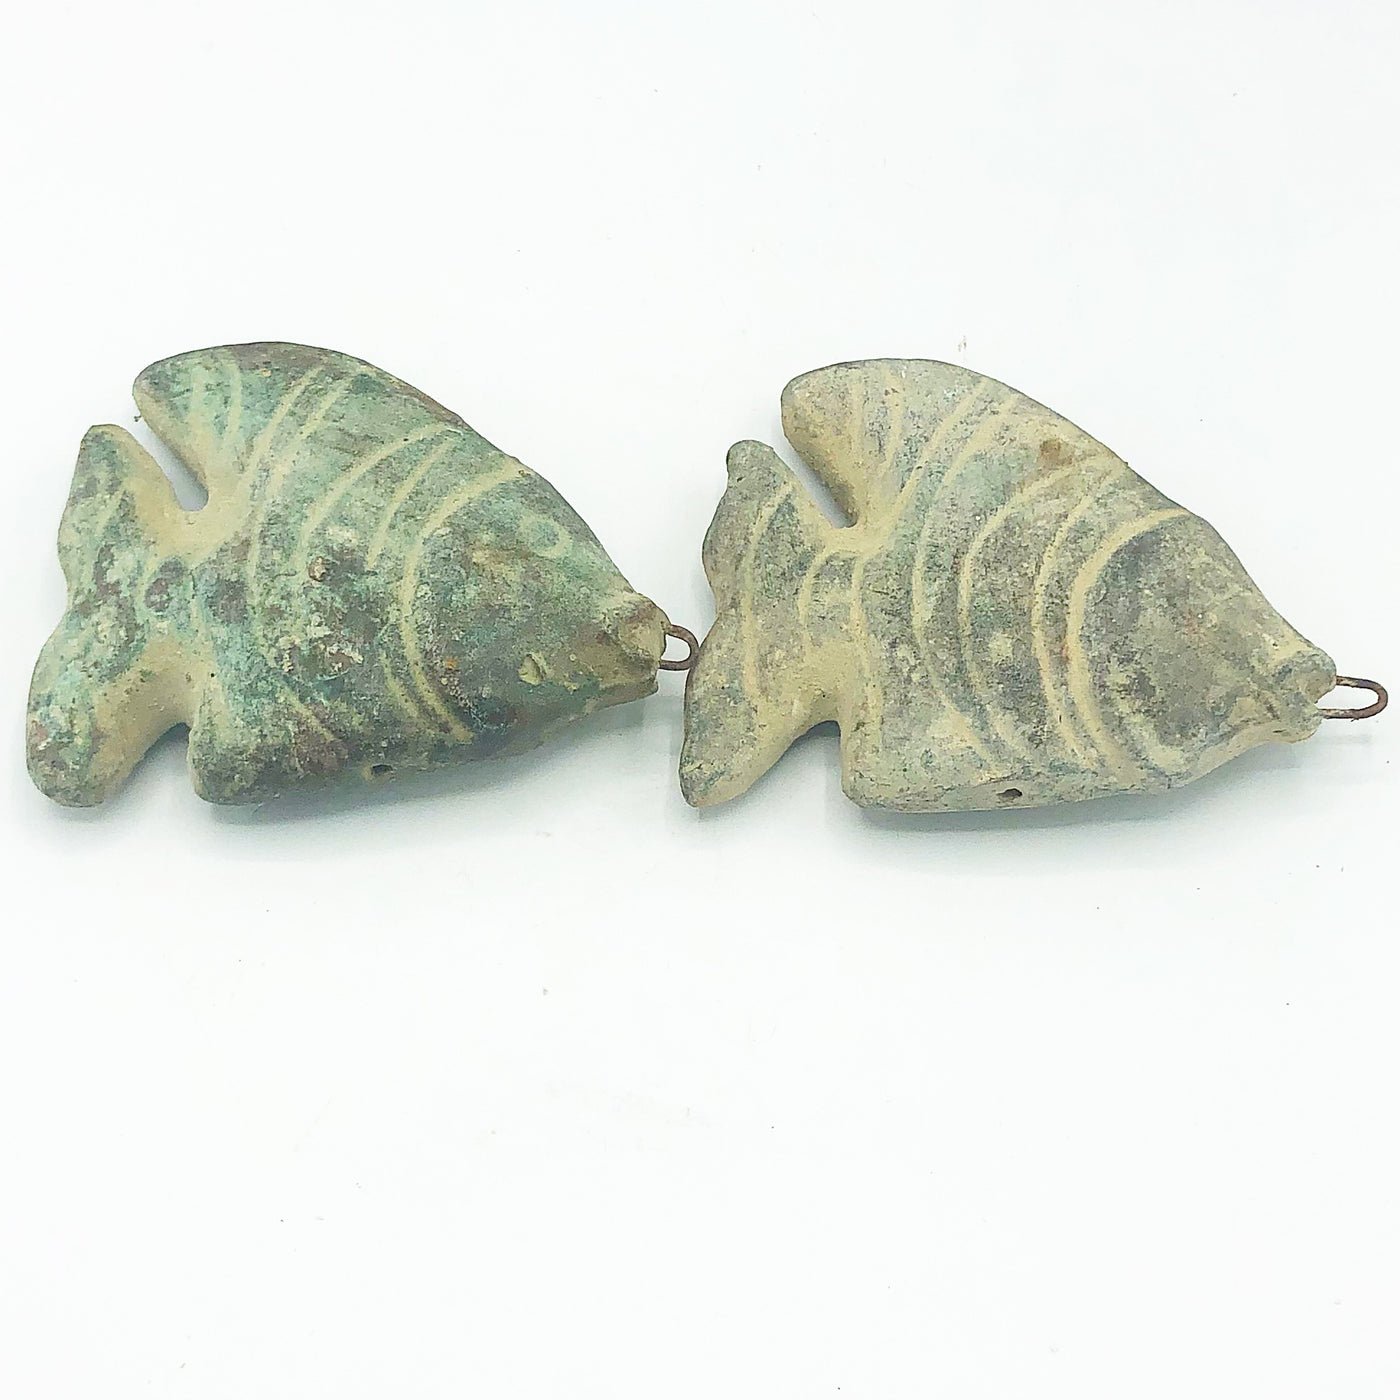 Set of 2 Distressed Fish Pottery Figurines